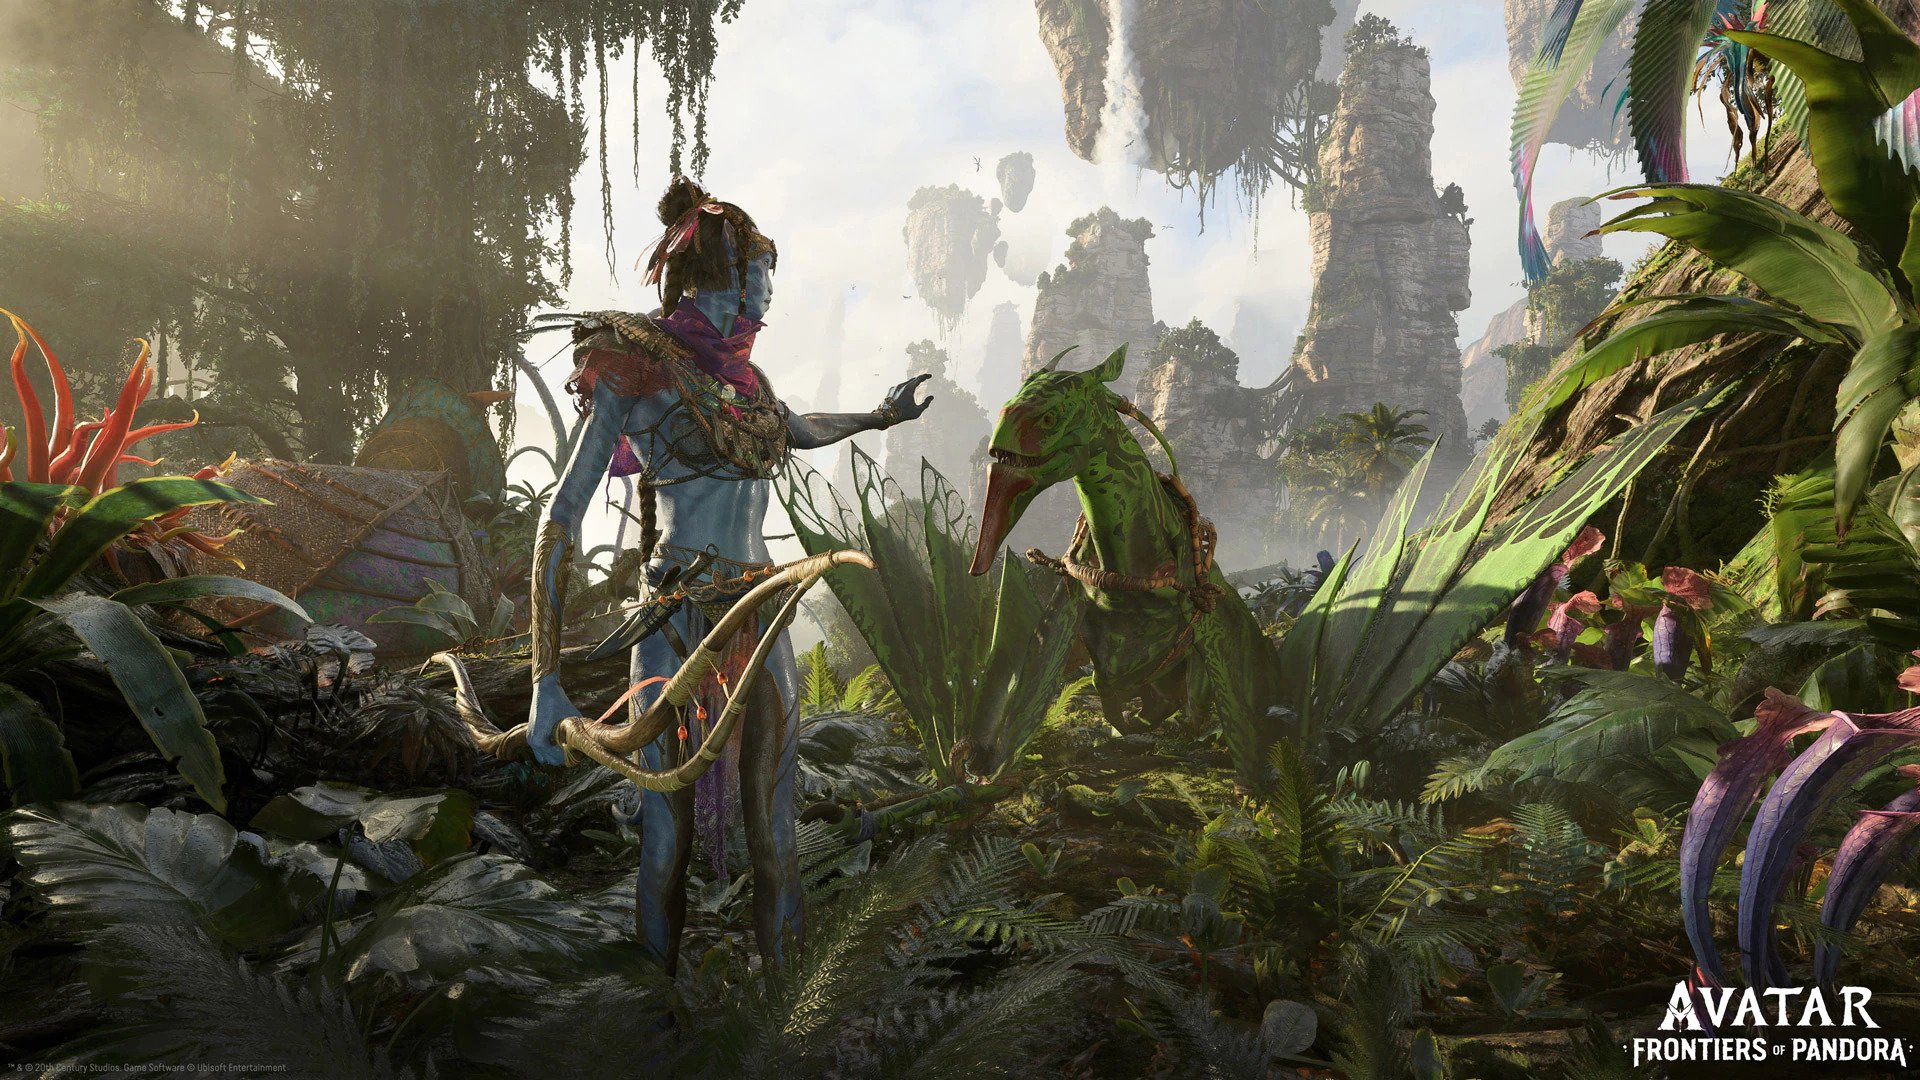 A Na'vi in the jungles of Avatar: Frontiers of Pandora.